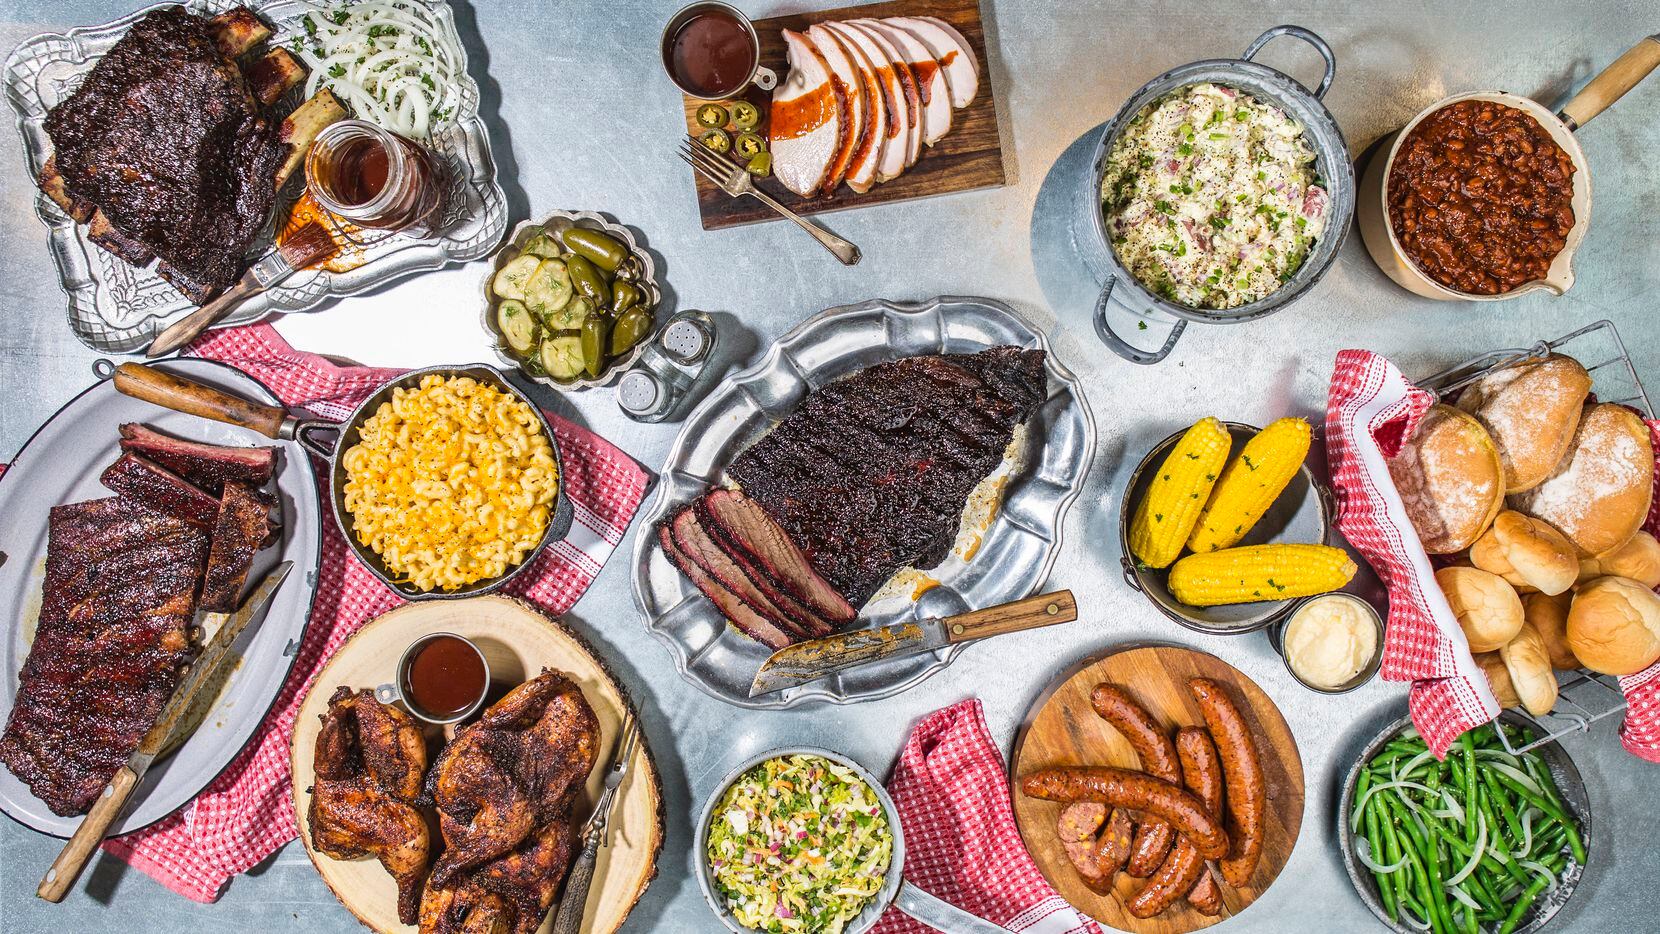 Ten50 BBQ in Richardson is offering family-style smoked meats, sides by the gallons and...